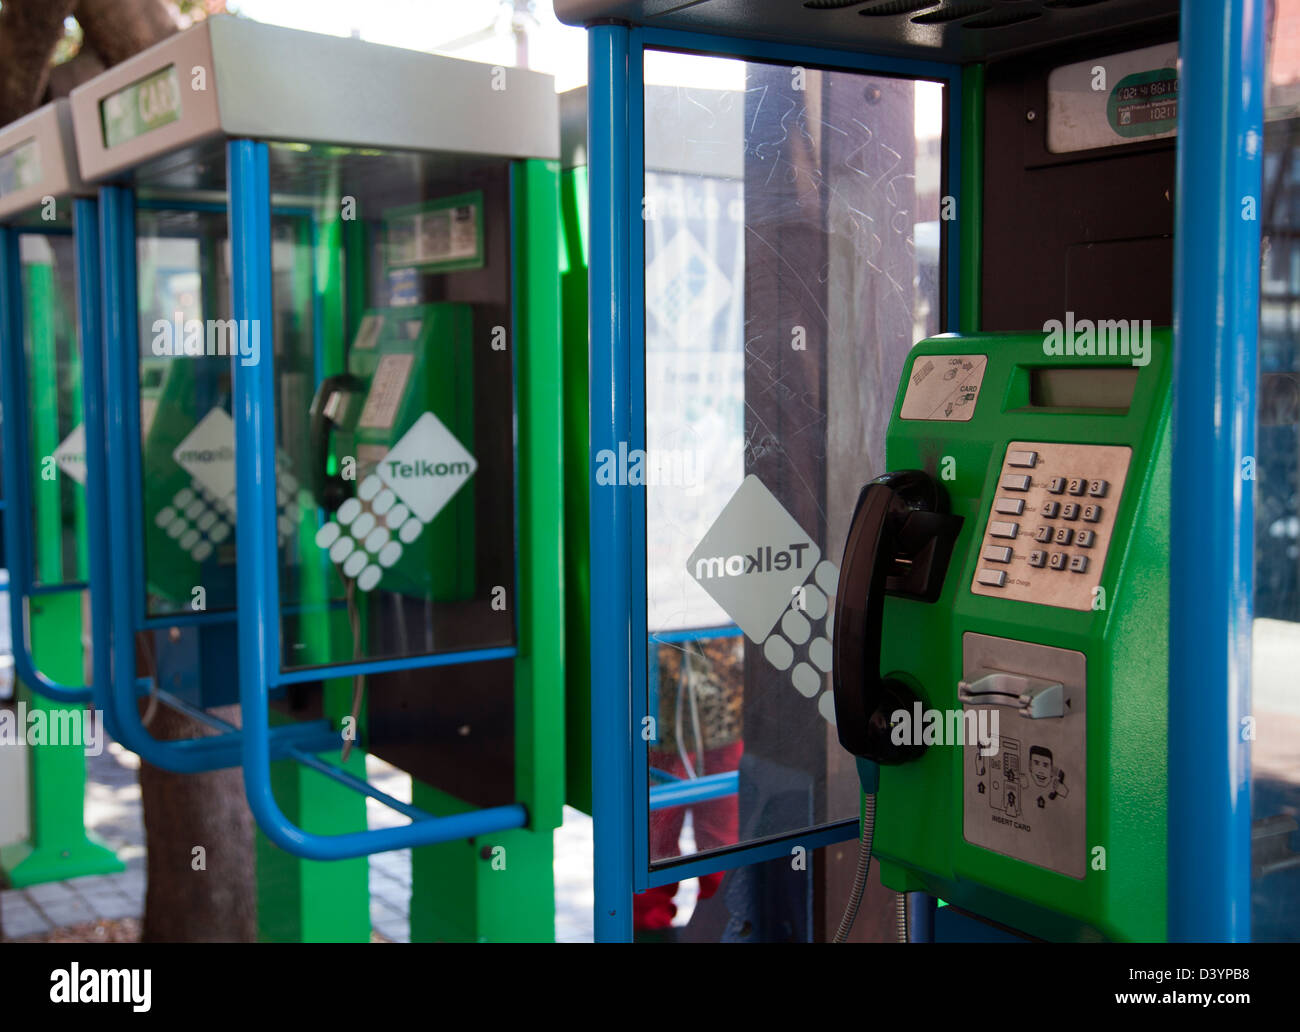 Telkom Callboxes at the Waterfront - Cape Town - South Africa Stock Photo